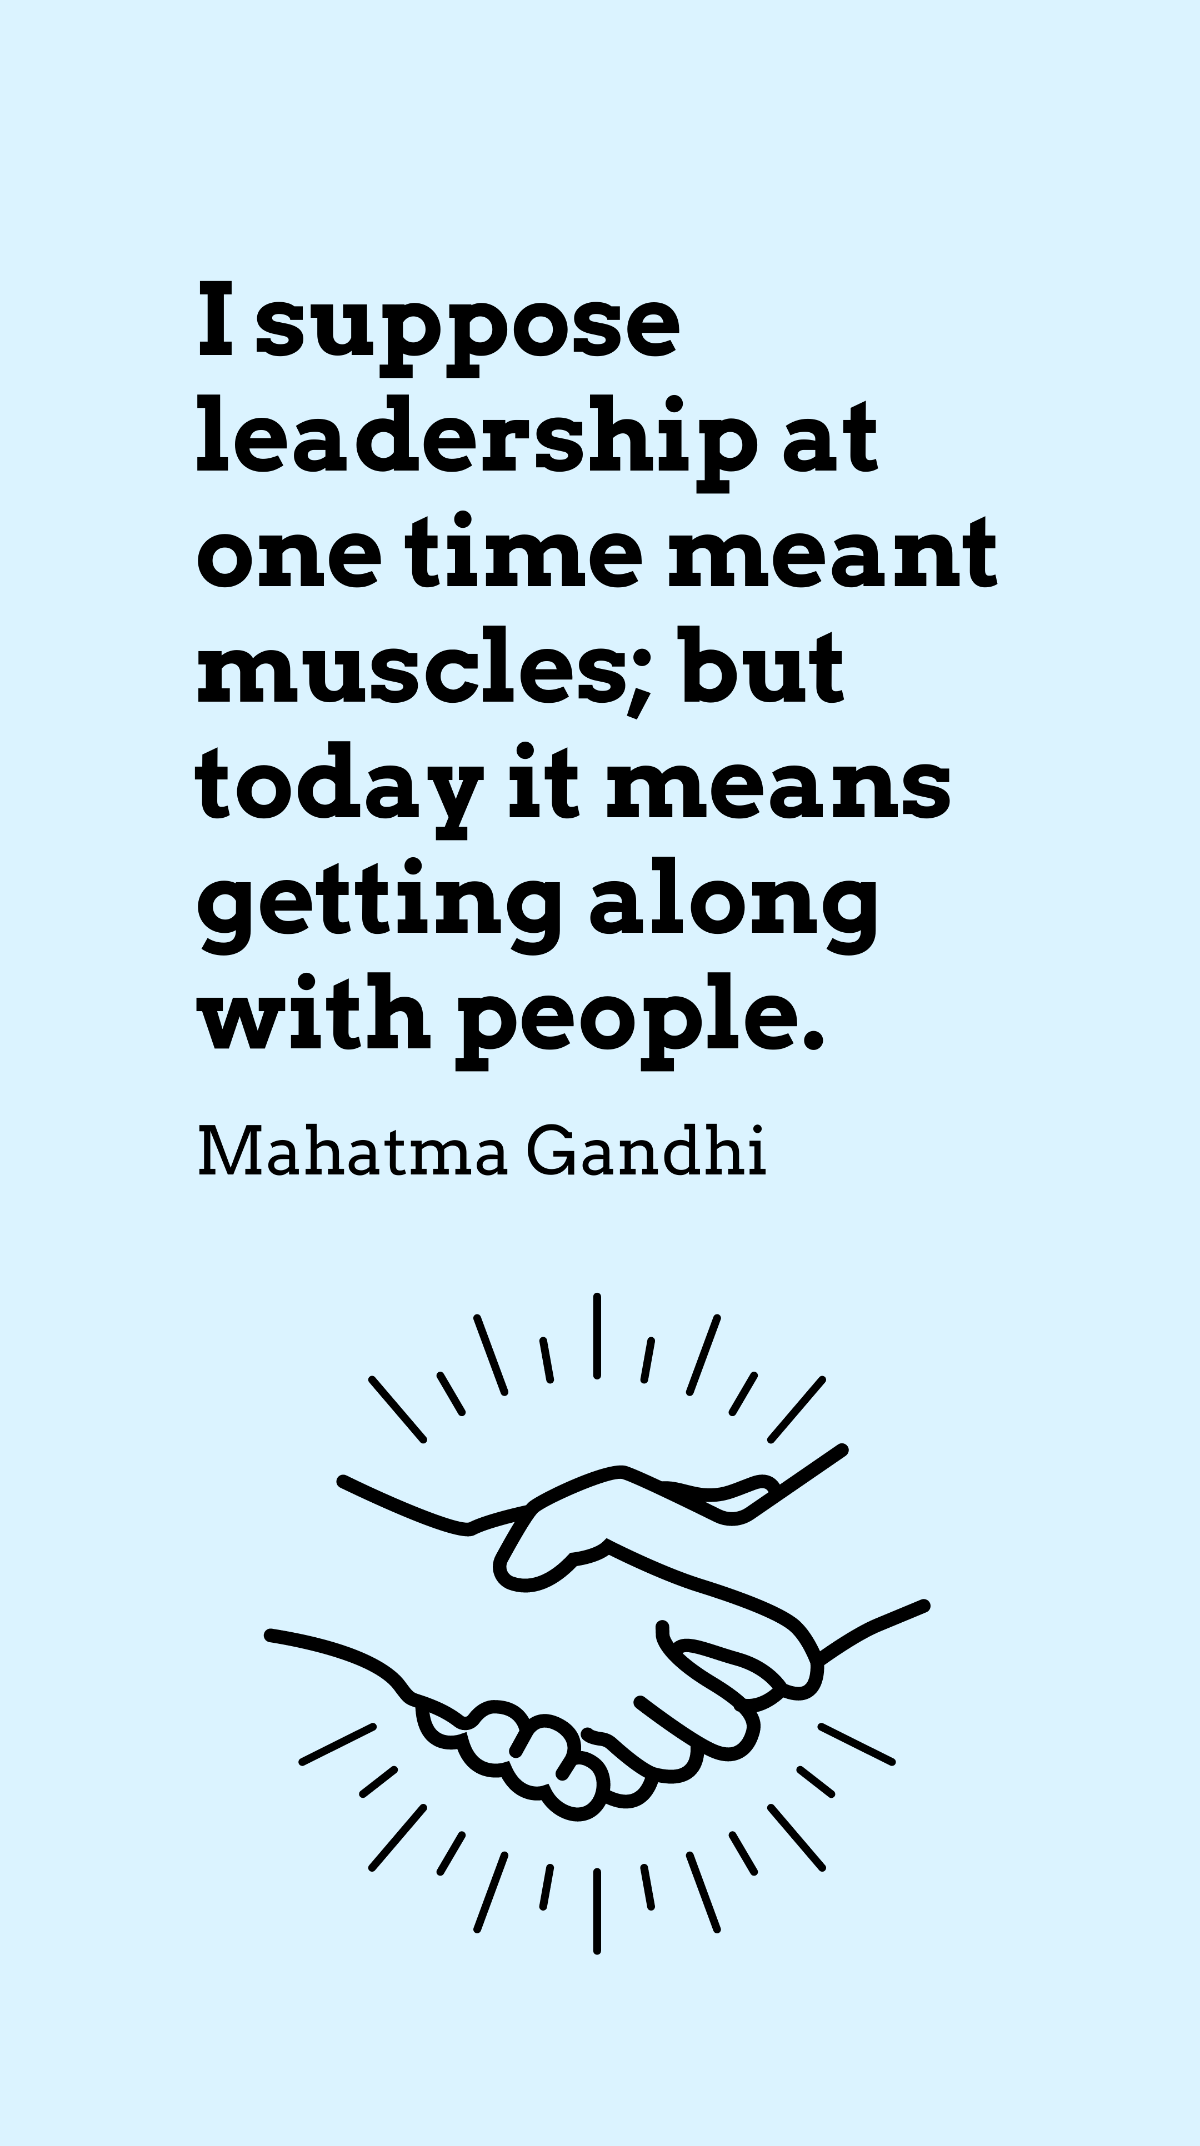 Mahatma Gandhi - I suppose leadership at one time meant muscles; but today it means getting along with people. Template